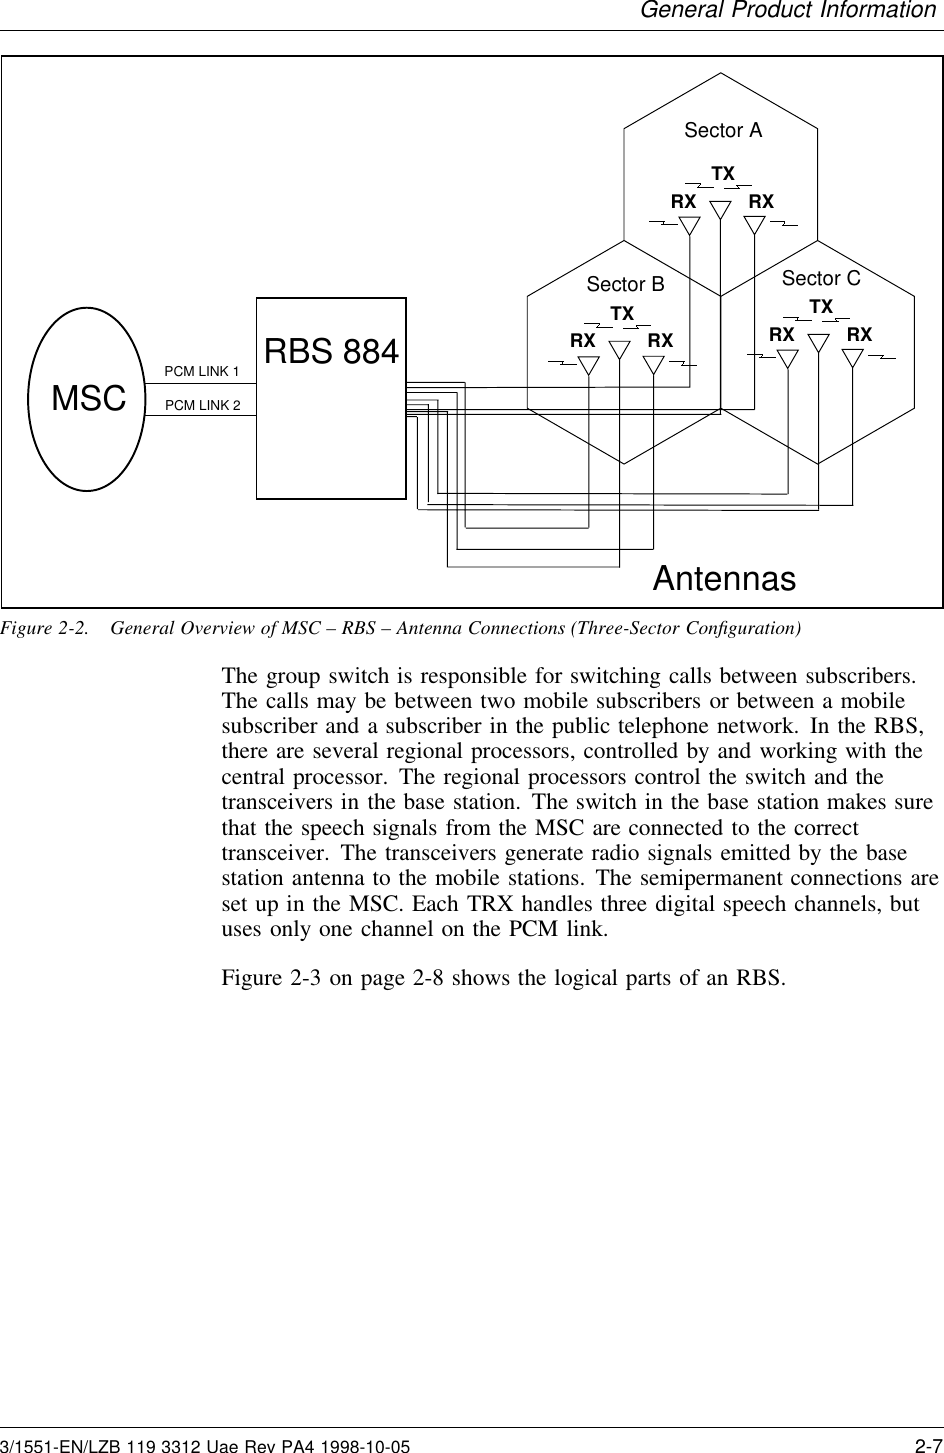 General Product InformationPCM LINK 1PCM LINK 2TXRX RXTXRX RXTXRX RXSector ASector B Sector CAntennasRBS 884MSCFigure 2-2. General Overview of MSC – RBS – Antenna Connections (Three-Sector Conﬁguration)The group switch is responsible for switching calls between subscribers.The calls may be between two mobile subscribers or between a mobilesubscriber and a subscriber in the public telephone network. In the RBS,there are several regional processors, controlled by and working with thecentral processor. The regional processors control the switch and thetransceivers in the base station. The switch in the base station makes surethat the speech signals from the MSC are connected to the correcttransceiver. The transceivers generate radio signals emitted by the basestation antenna to the mobile stations. The semipermanent connections areset up in the MSC. Each TRX handles three digital speech channels, butuses only one channel on the PCM link.Figure 2-3 on page 2-8 shows the logical parts of an RBS.3/1551-EN/LZB 119 3312 Uae Rev PA4 1998-10-05 2-7